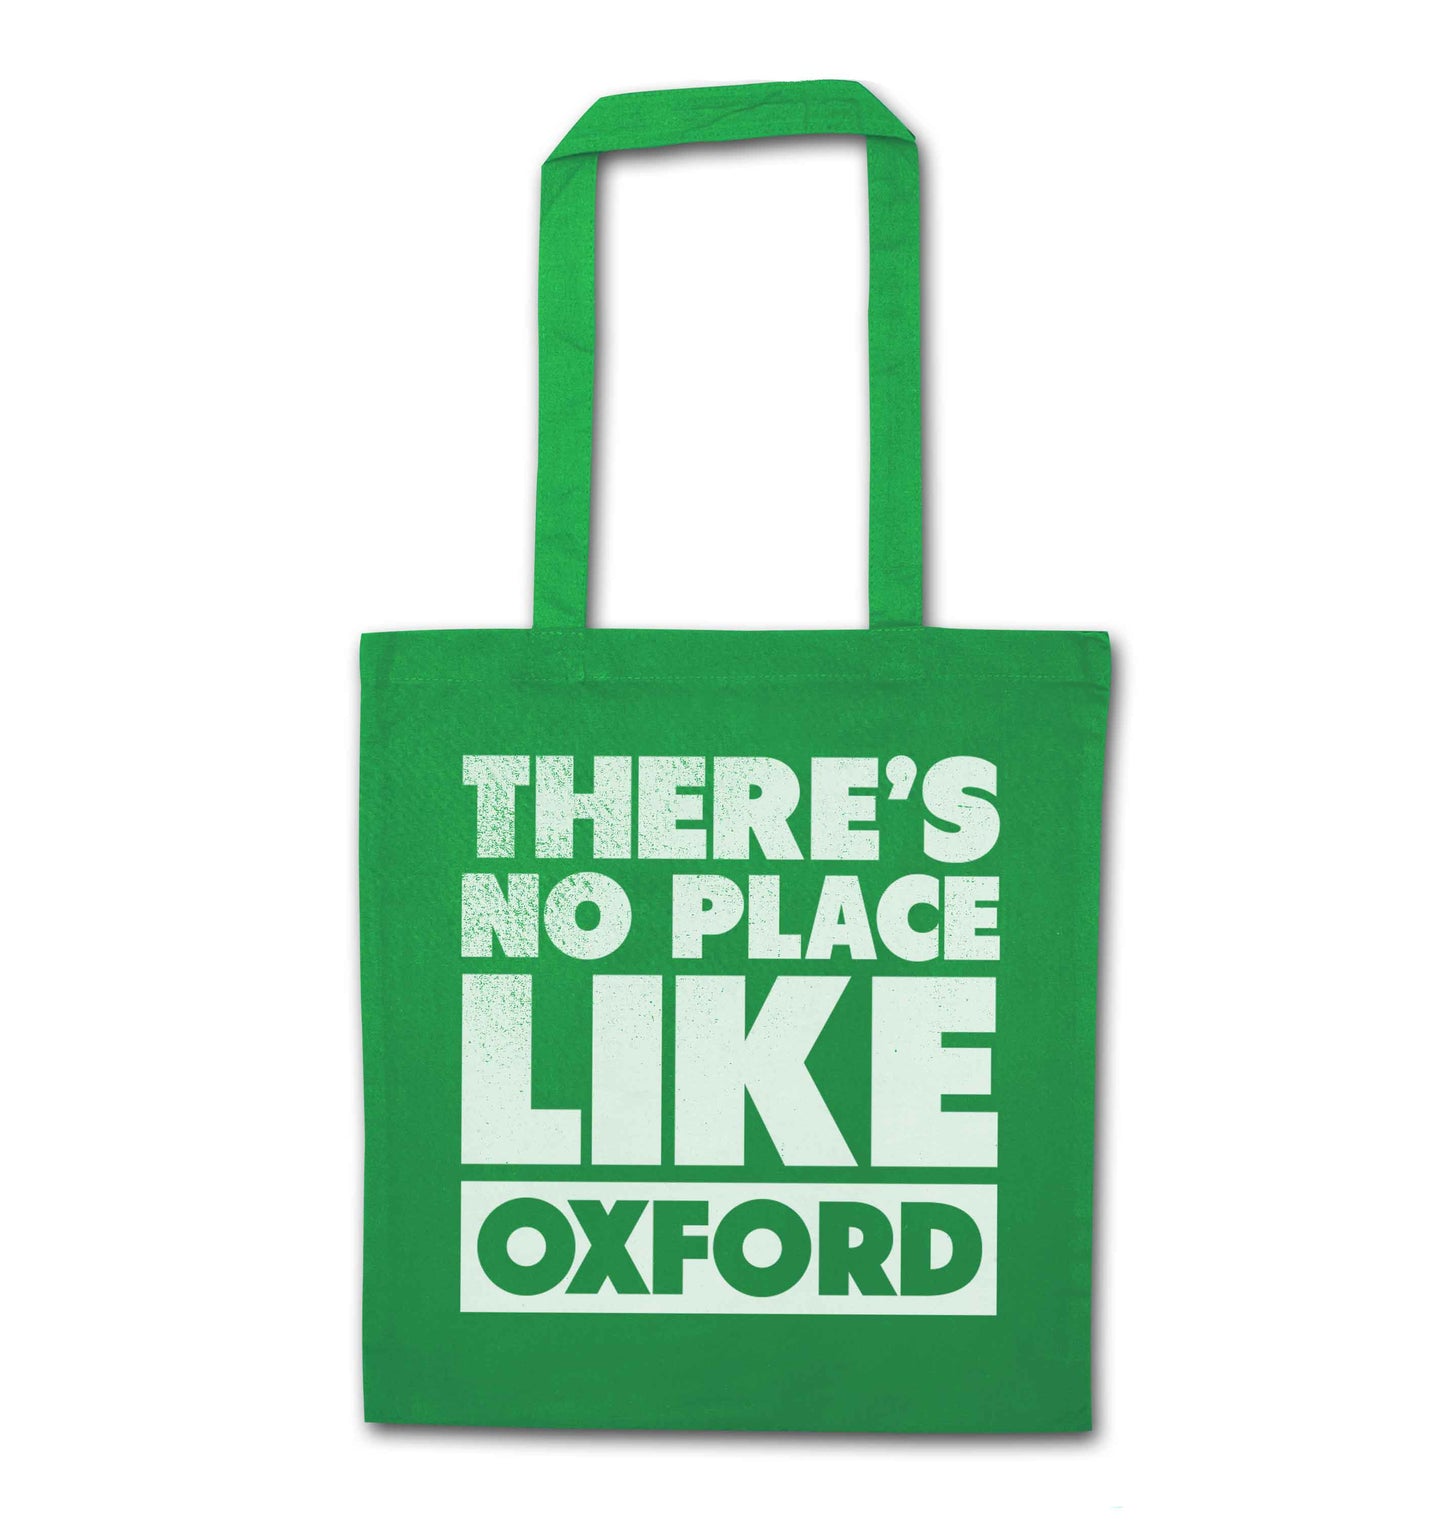 There's no place like Oxford green tote bag